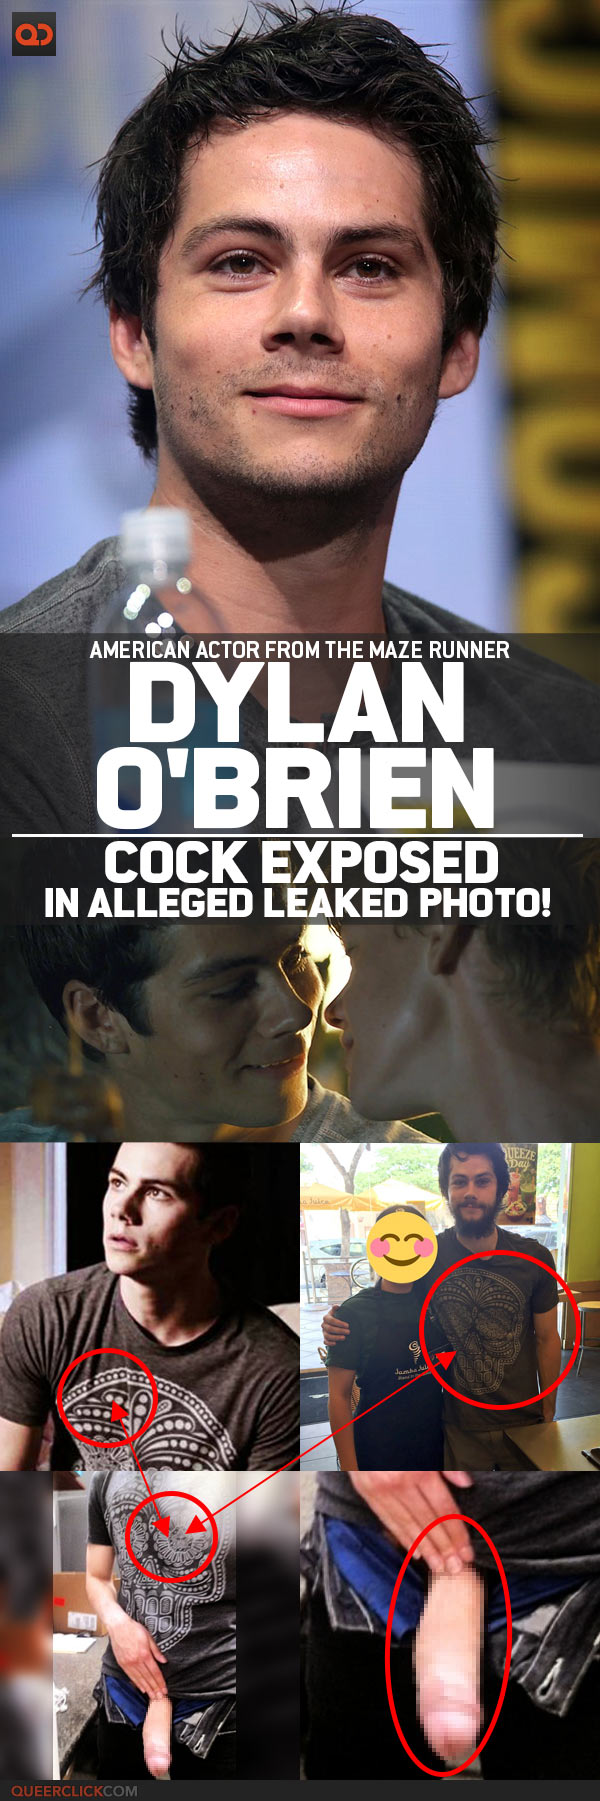 Dylan O'Brien, American Actor From The Maze Runner, Cock Exposed In Alleged Leaked Photo!